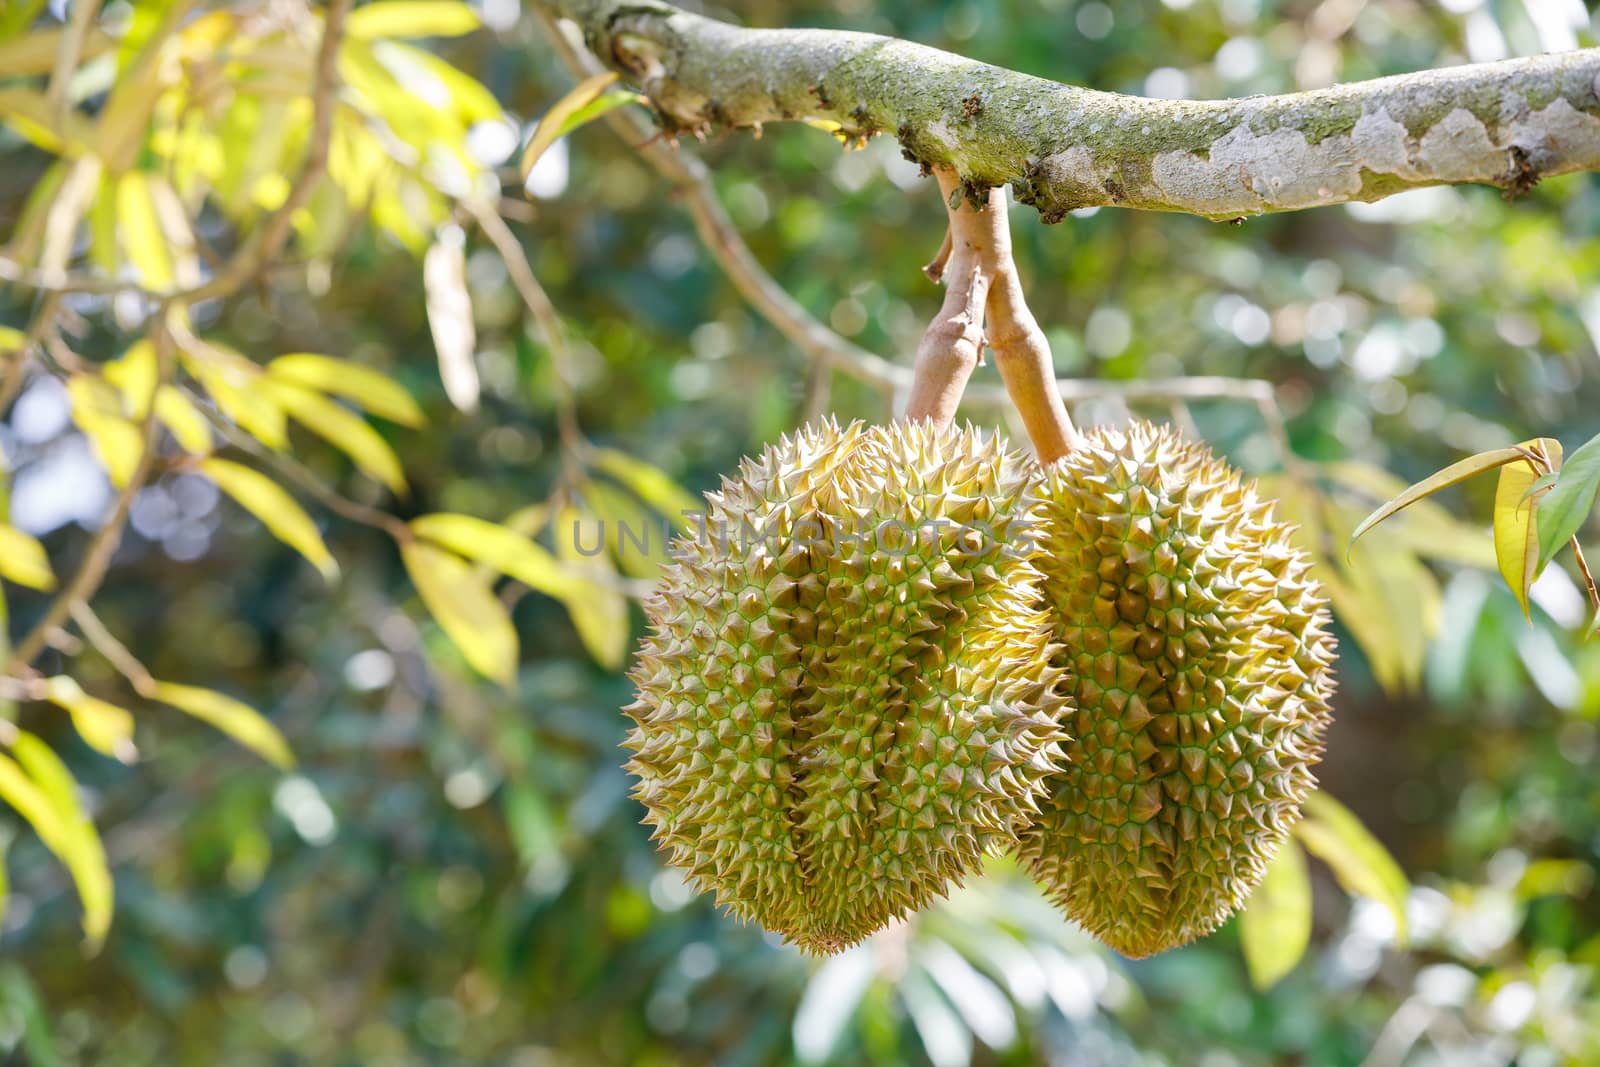 Durian fruit on tree in Thailand